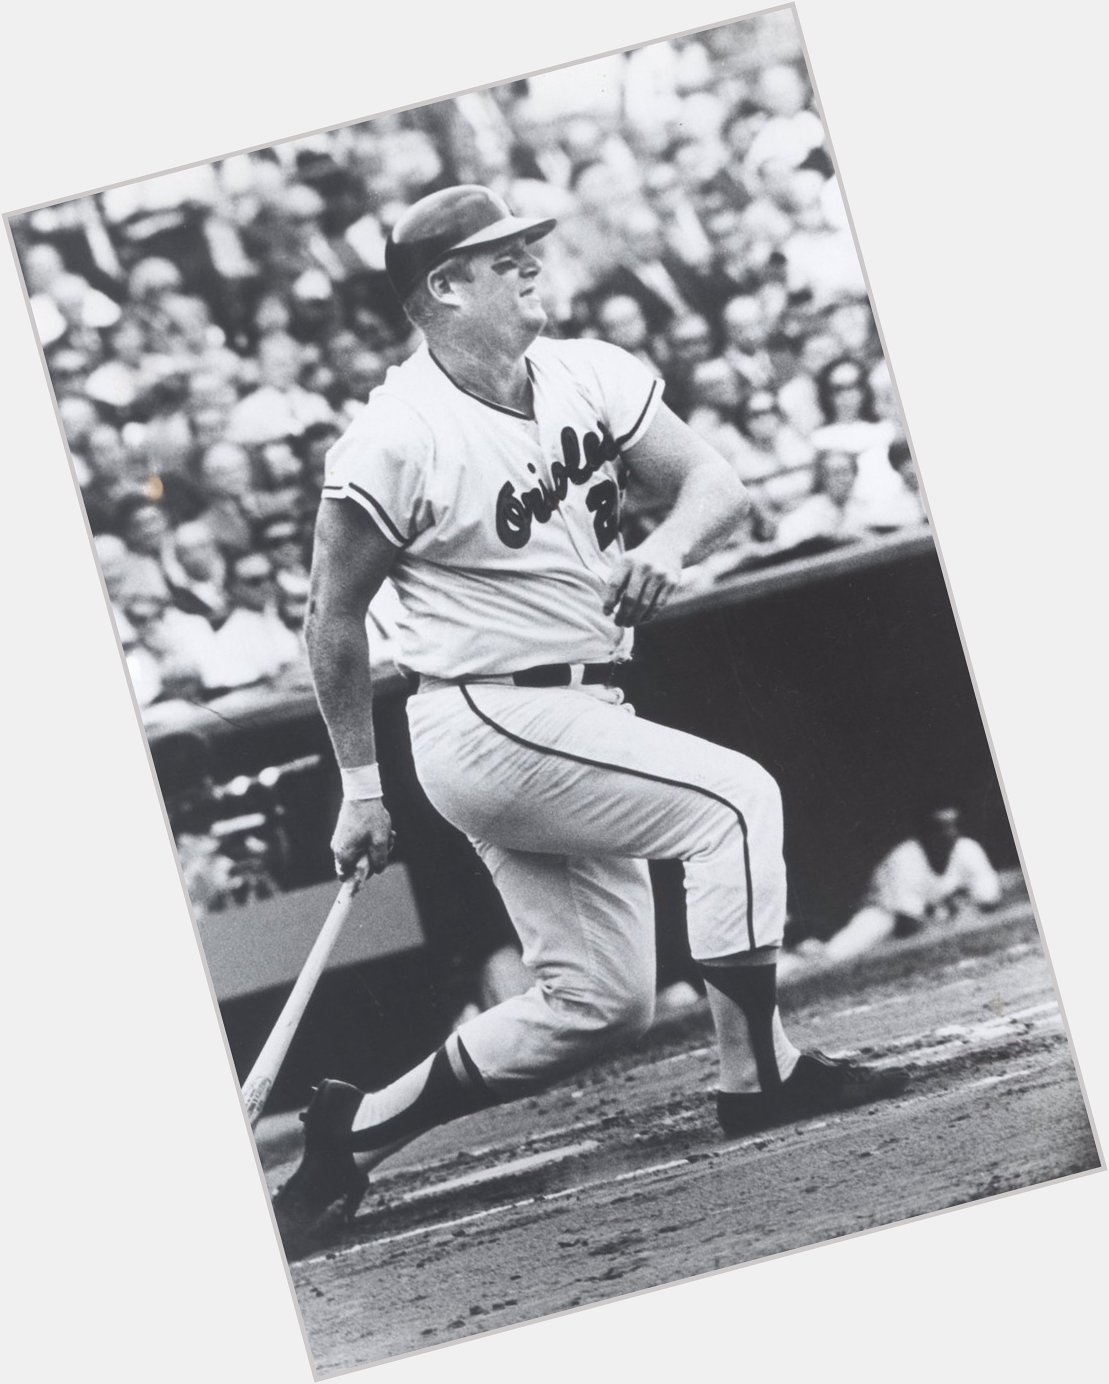 Happy 76th Birthday to Hall of Famer Boog Powell! 